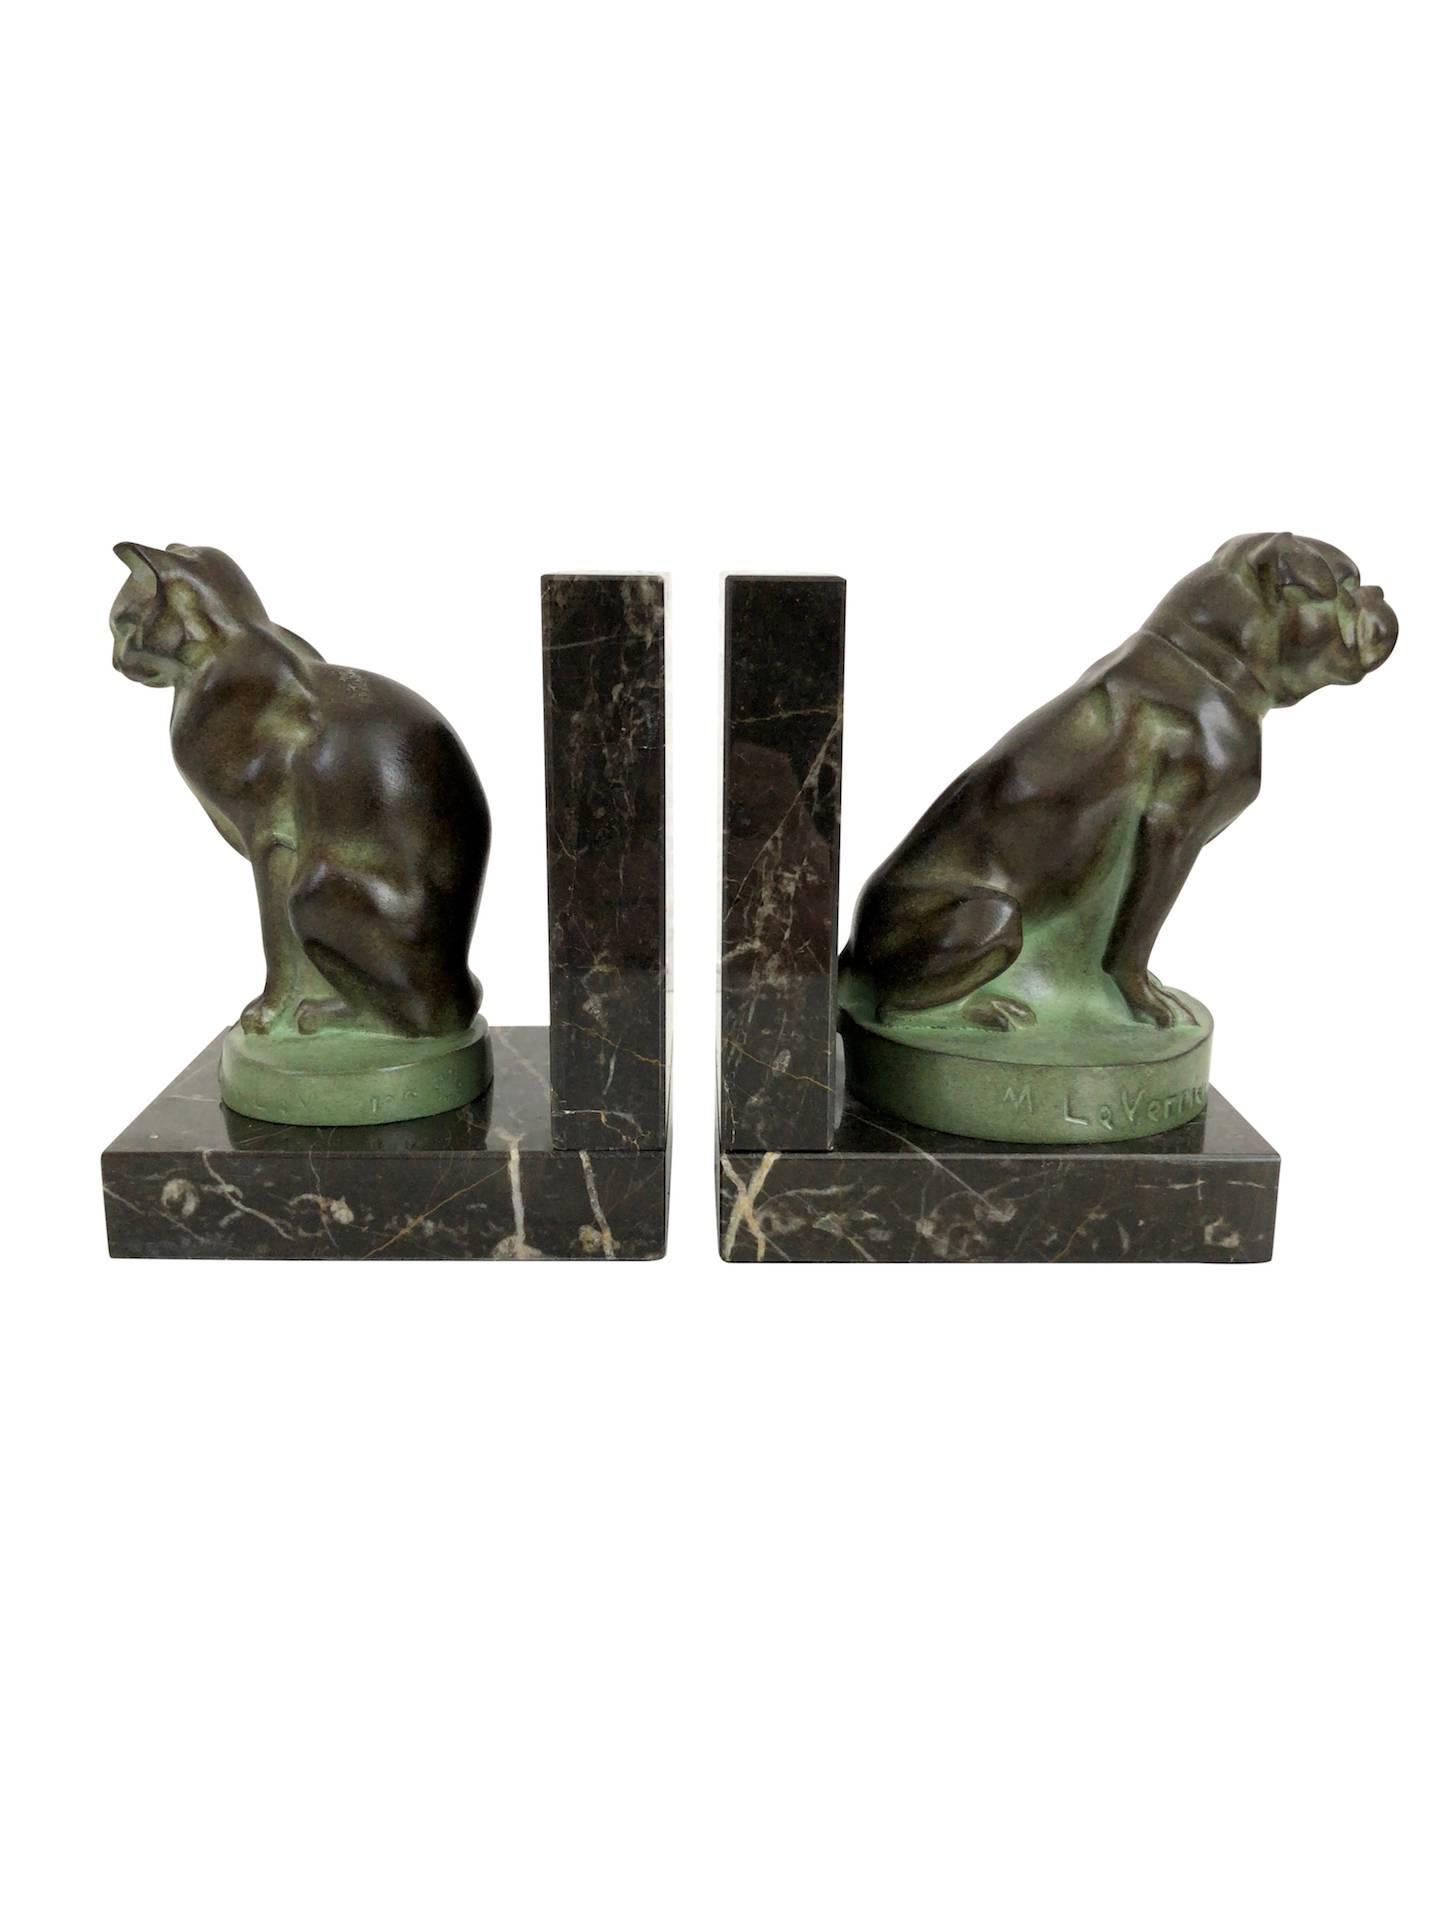 Patinated Chat et Dogue Art Deco Bookends of a Cat and a Dog from Max Le Verrier